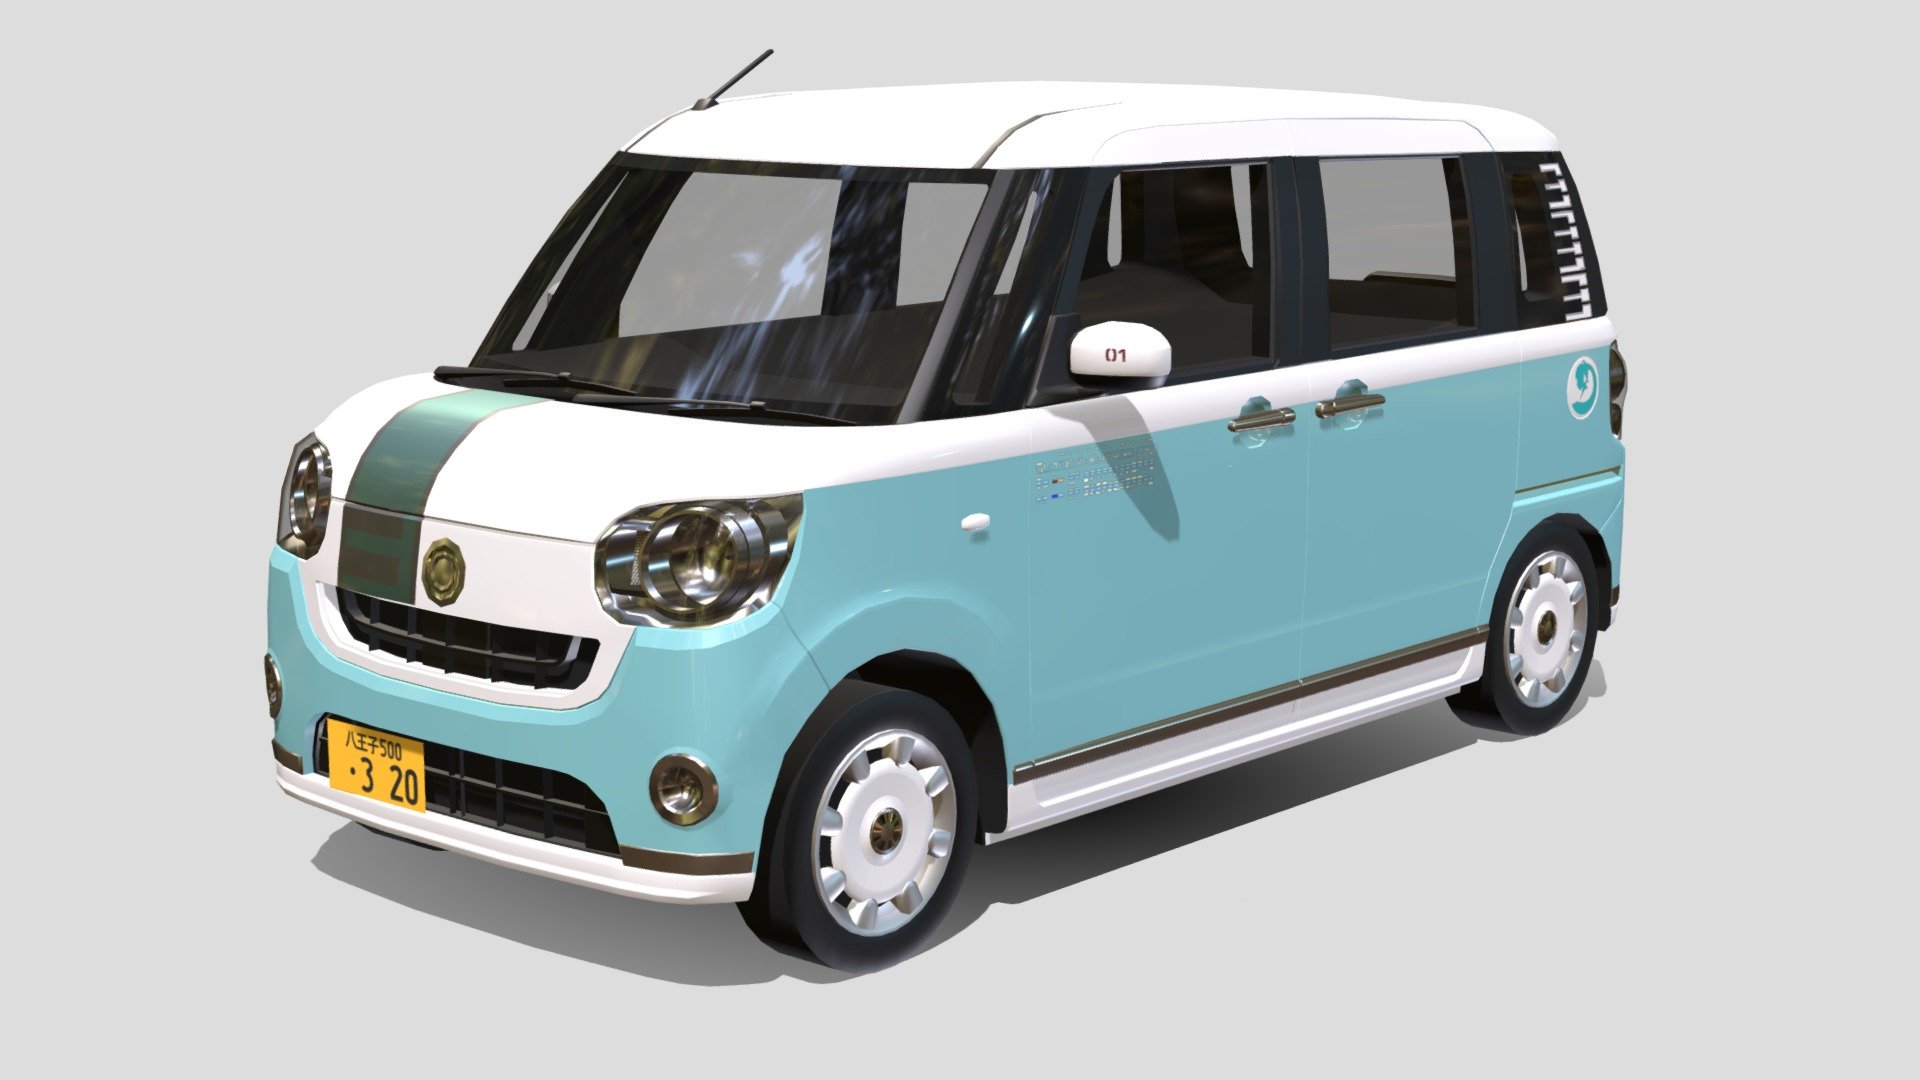 2016 Daihatsu Move Canbus, Miku Edition! Made in a weekend as part of a tutorial on how to model a simple car for a friend, it turned out quite well! - 2016 Daihatsu Move Canbus Miku Edition - 3D model by Ezo (@EzoYEAHH) 3d model